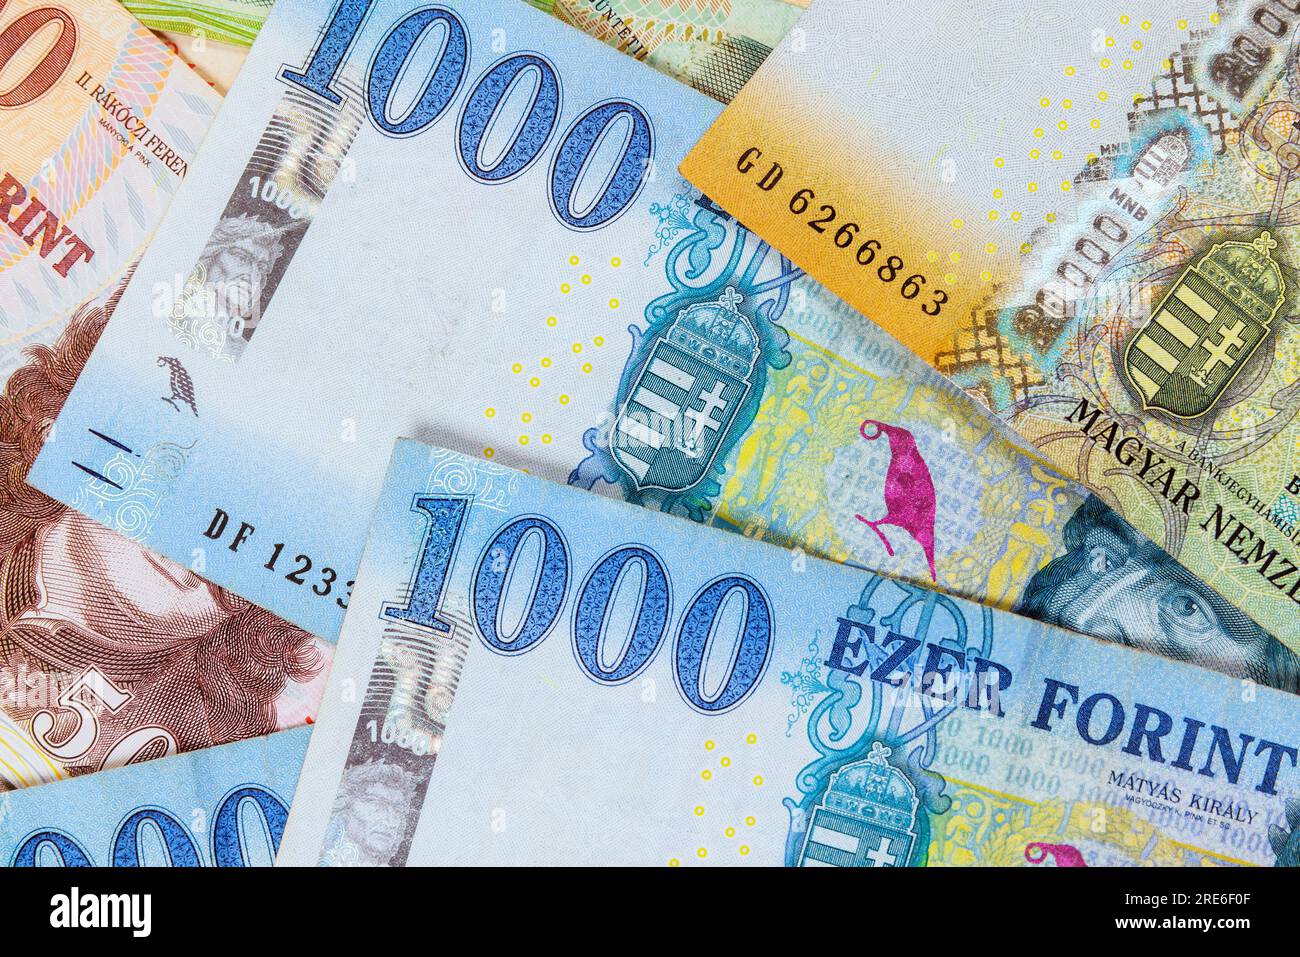 HUF cash of Hungarian forints, a different value currency. Stock Photo